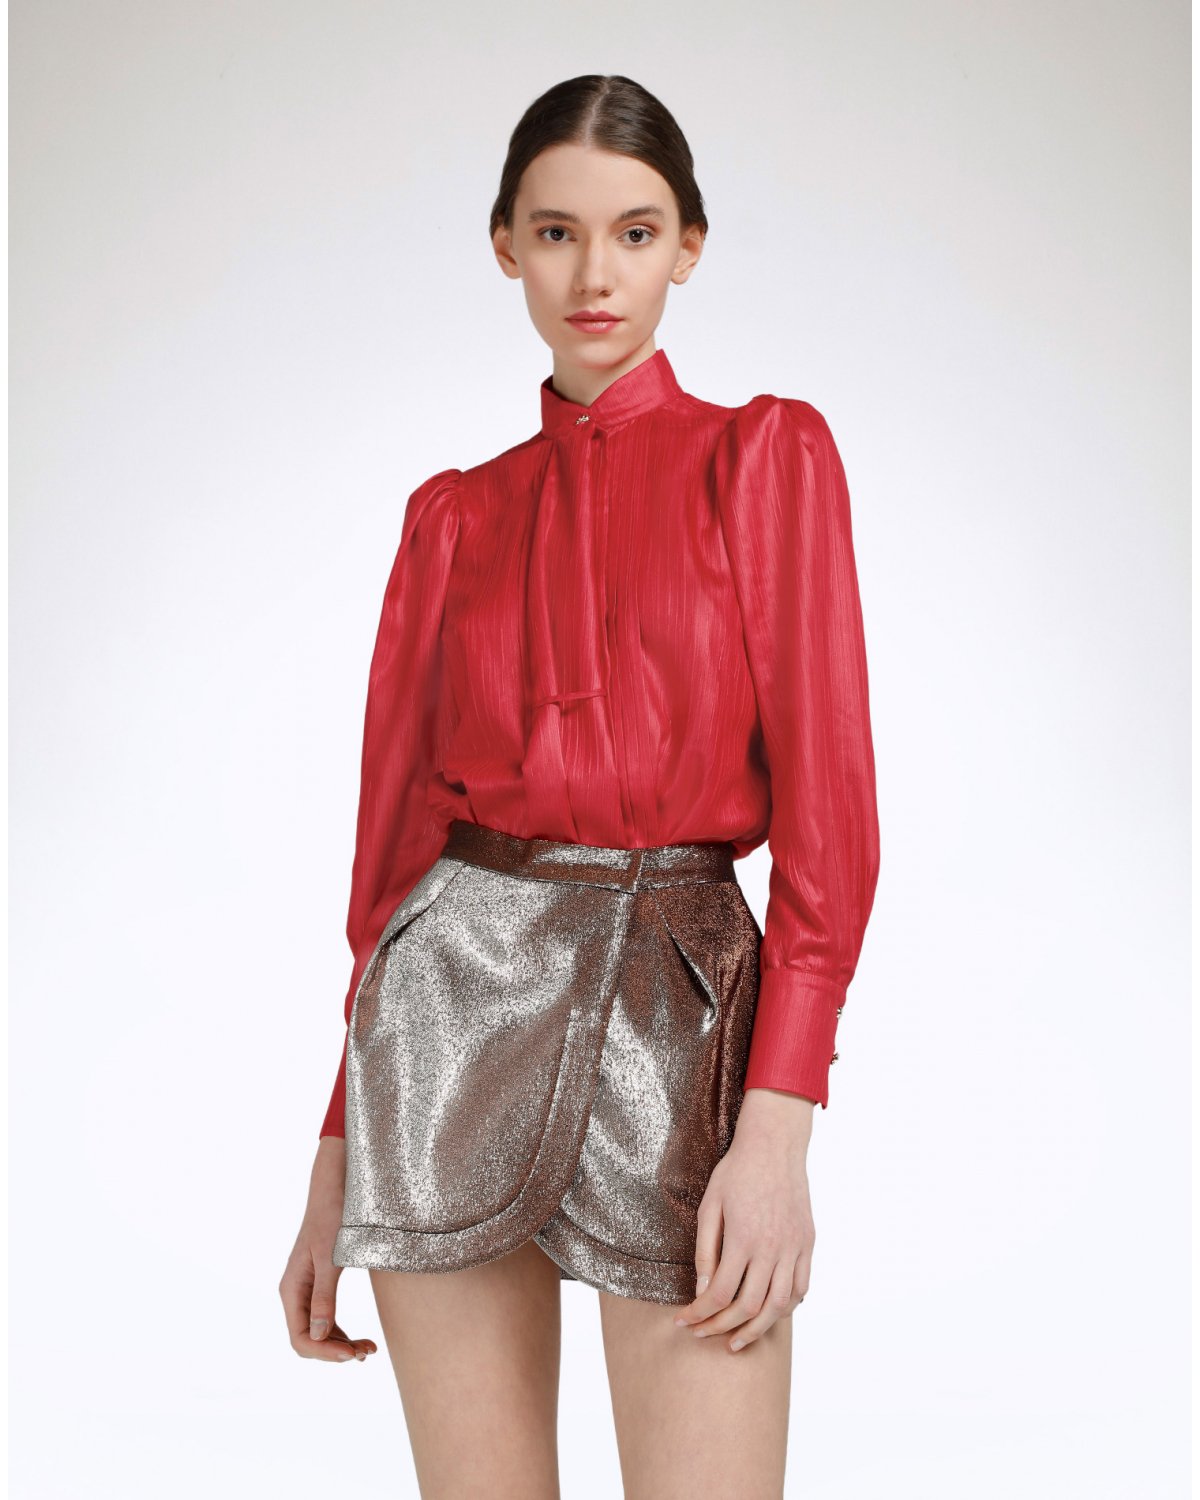 Red crinkled shirt with puffball sleeves | | Genny